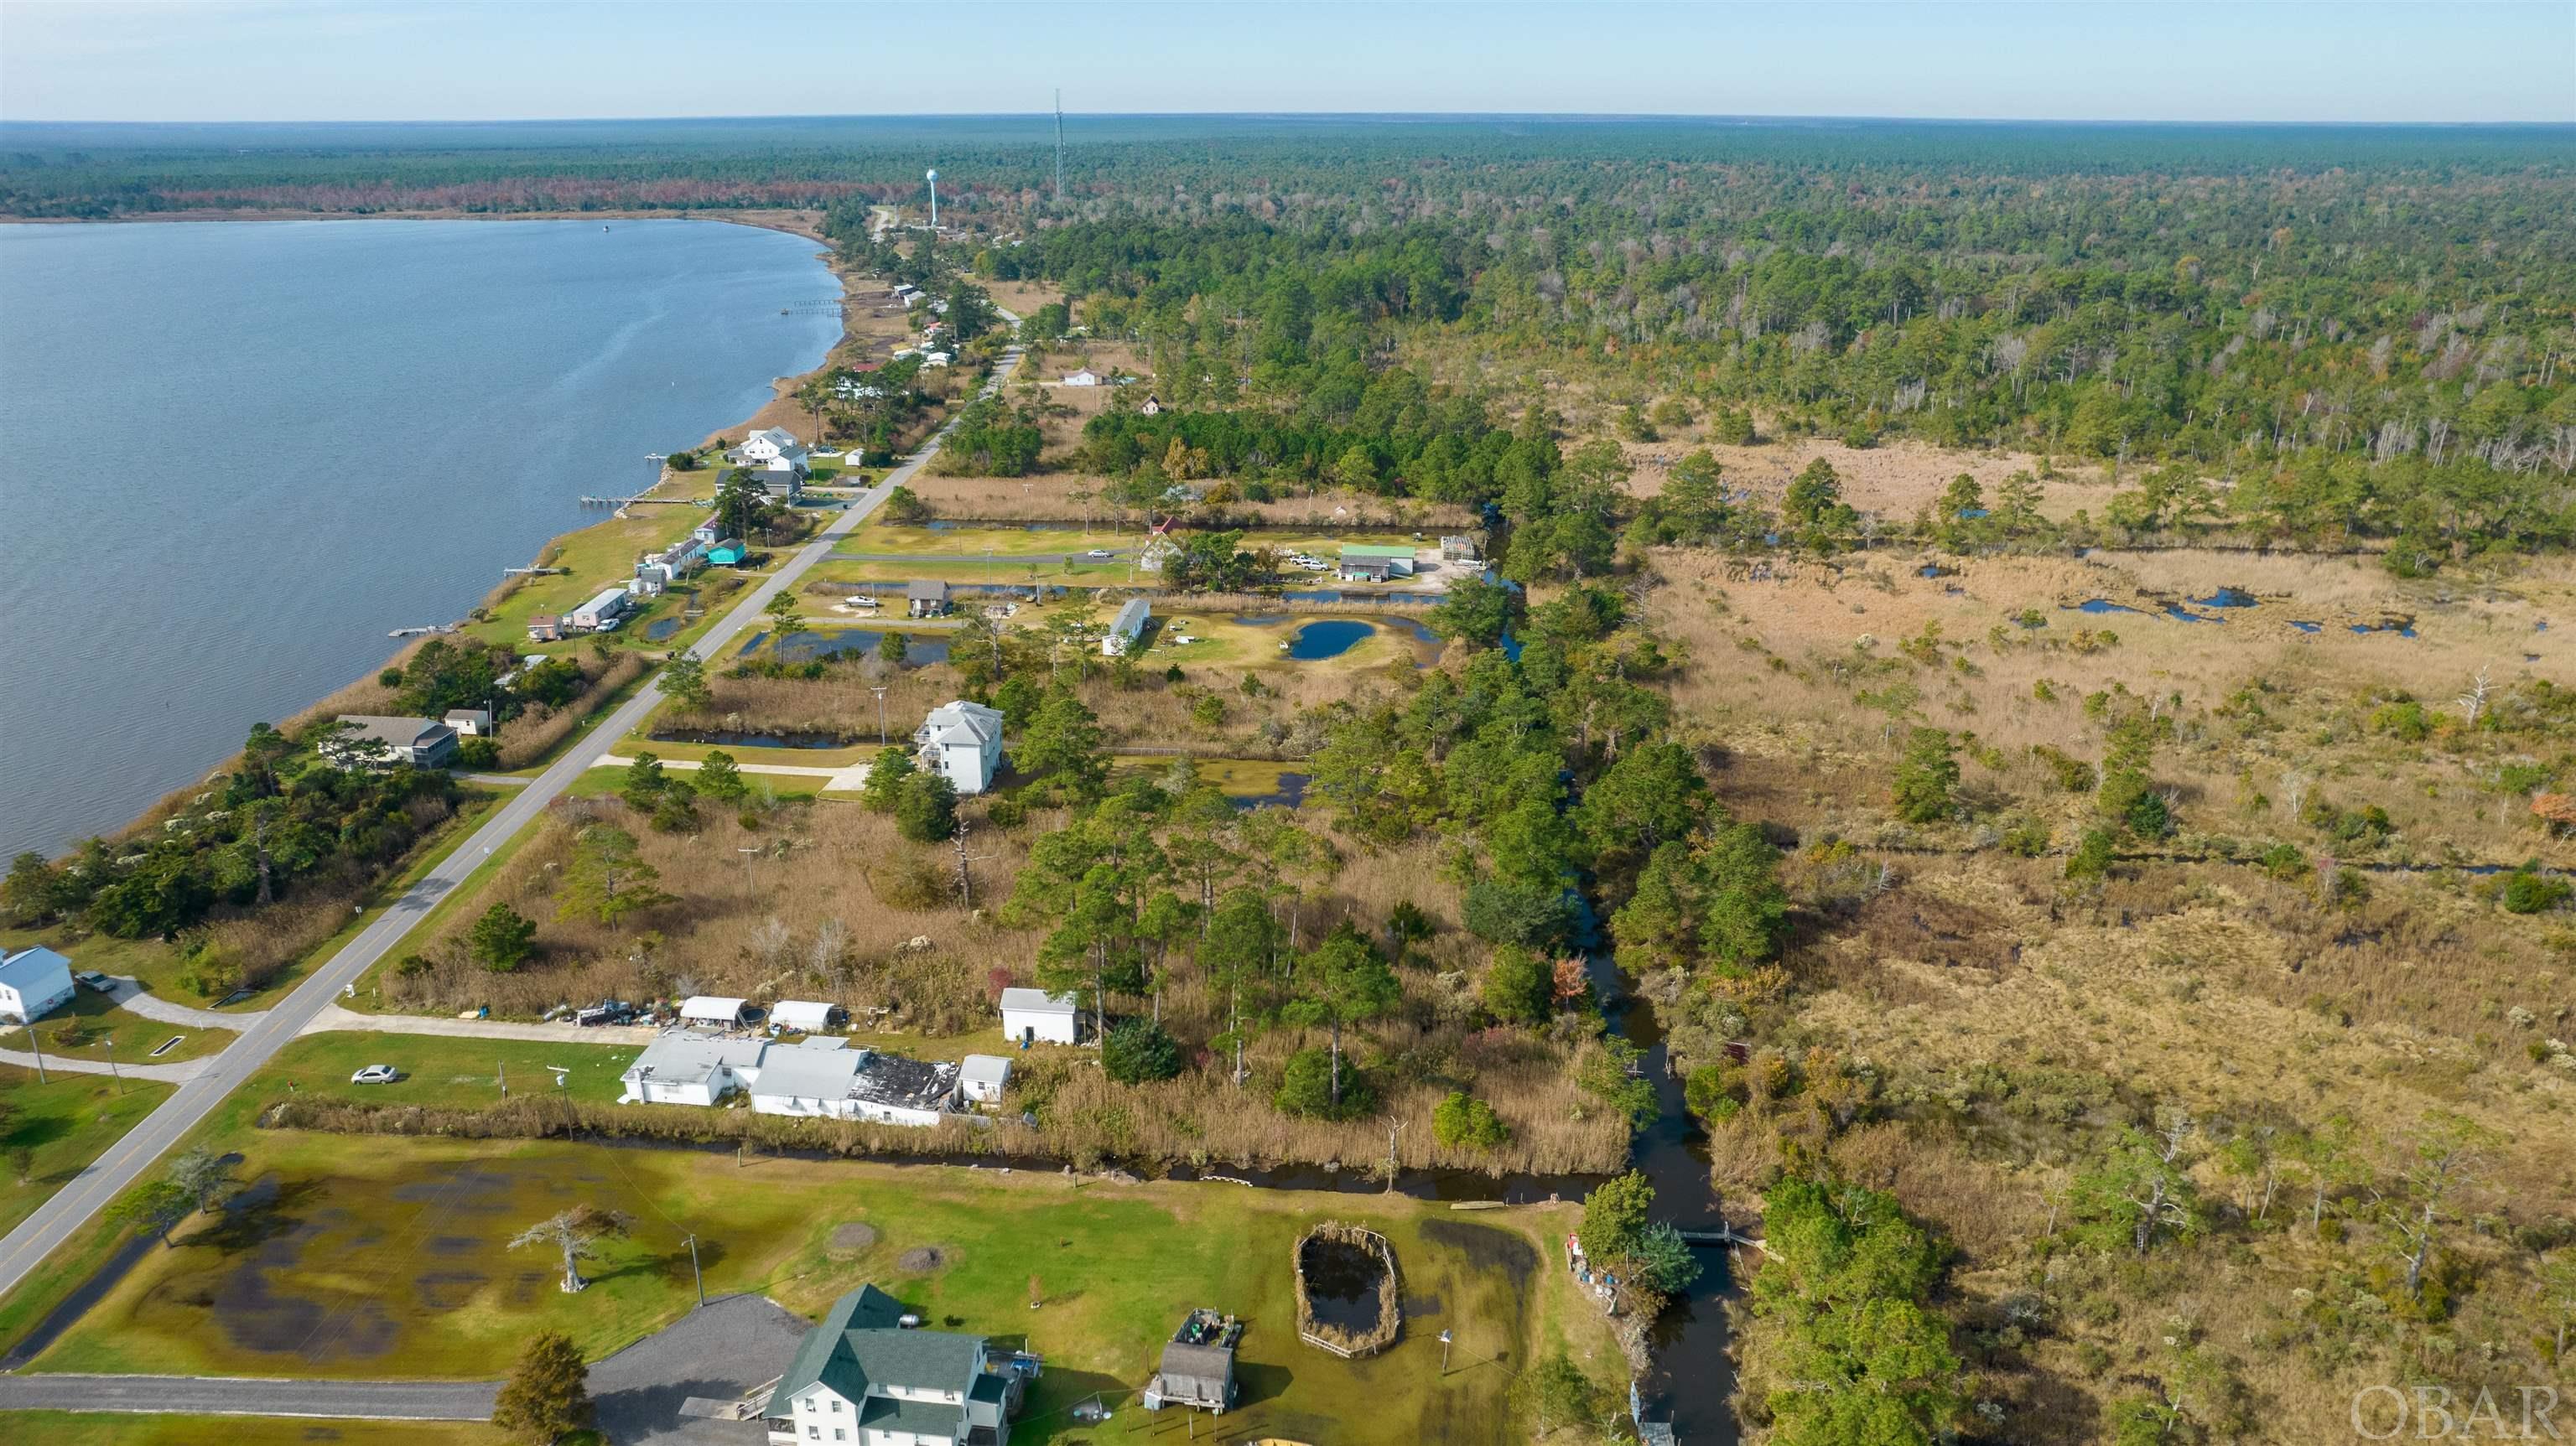 170 Bayview Drive, Stumpy Point, NC 27978, ,Lots/land,For sale,Bayview Drive,116864